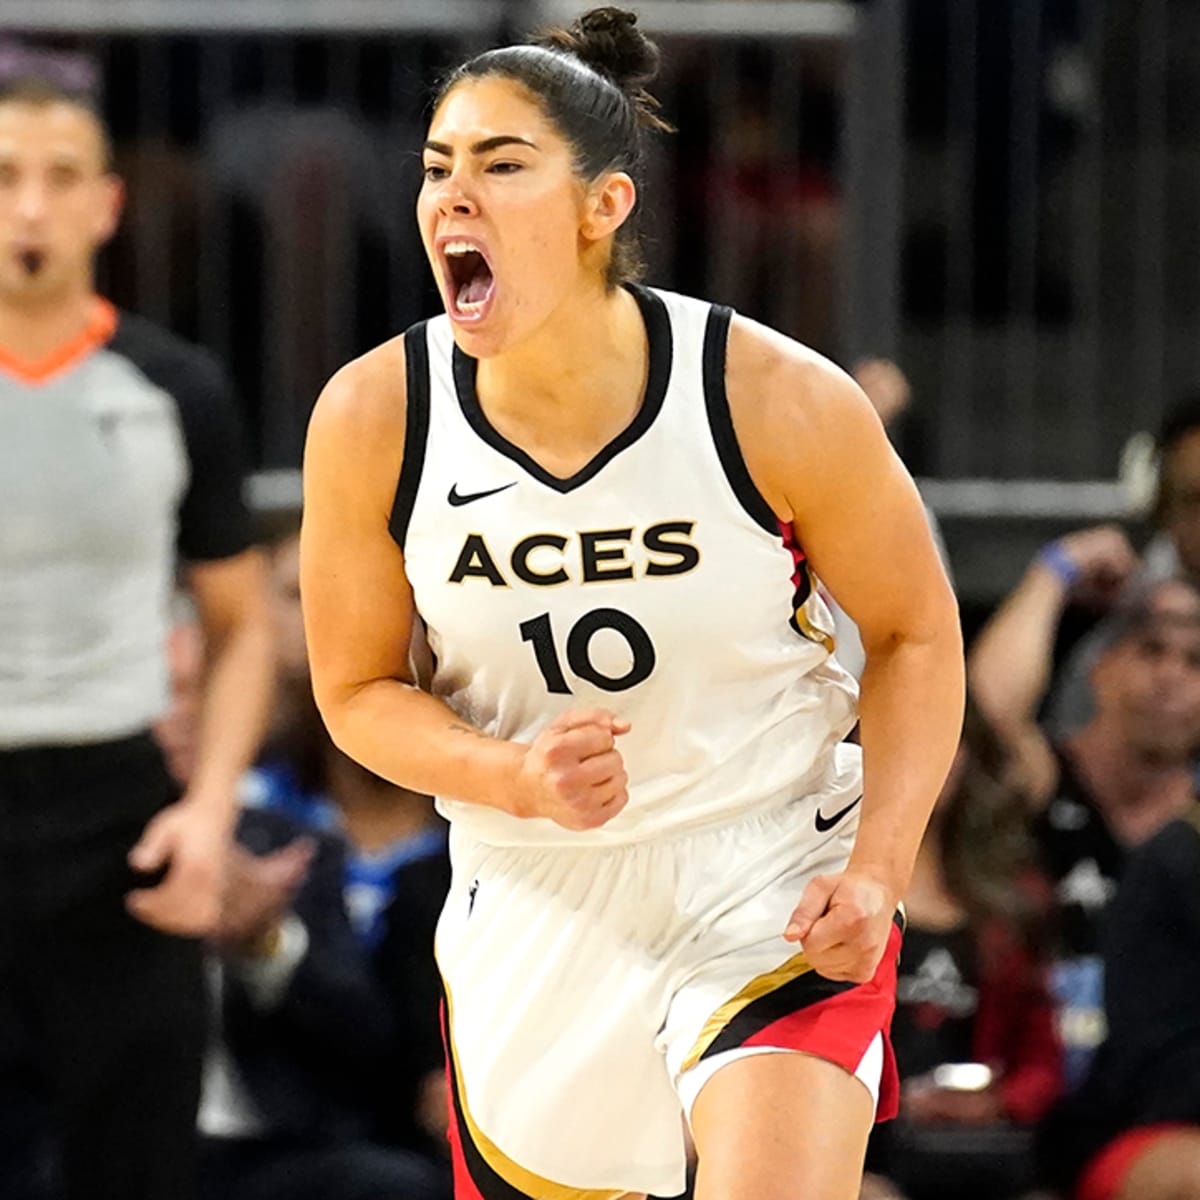 Aces' Kelsey Plum inks Under Armour deal after career year - Just Women's  Sports